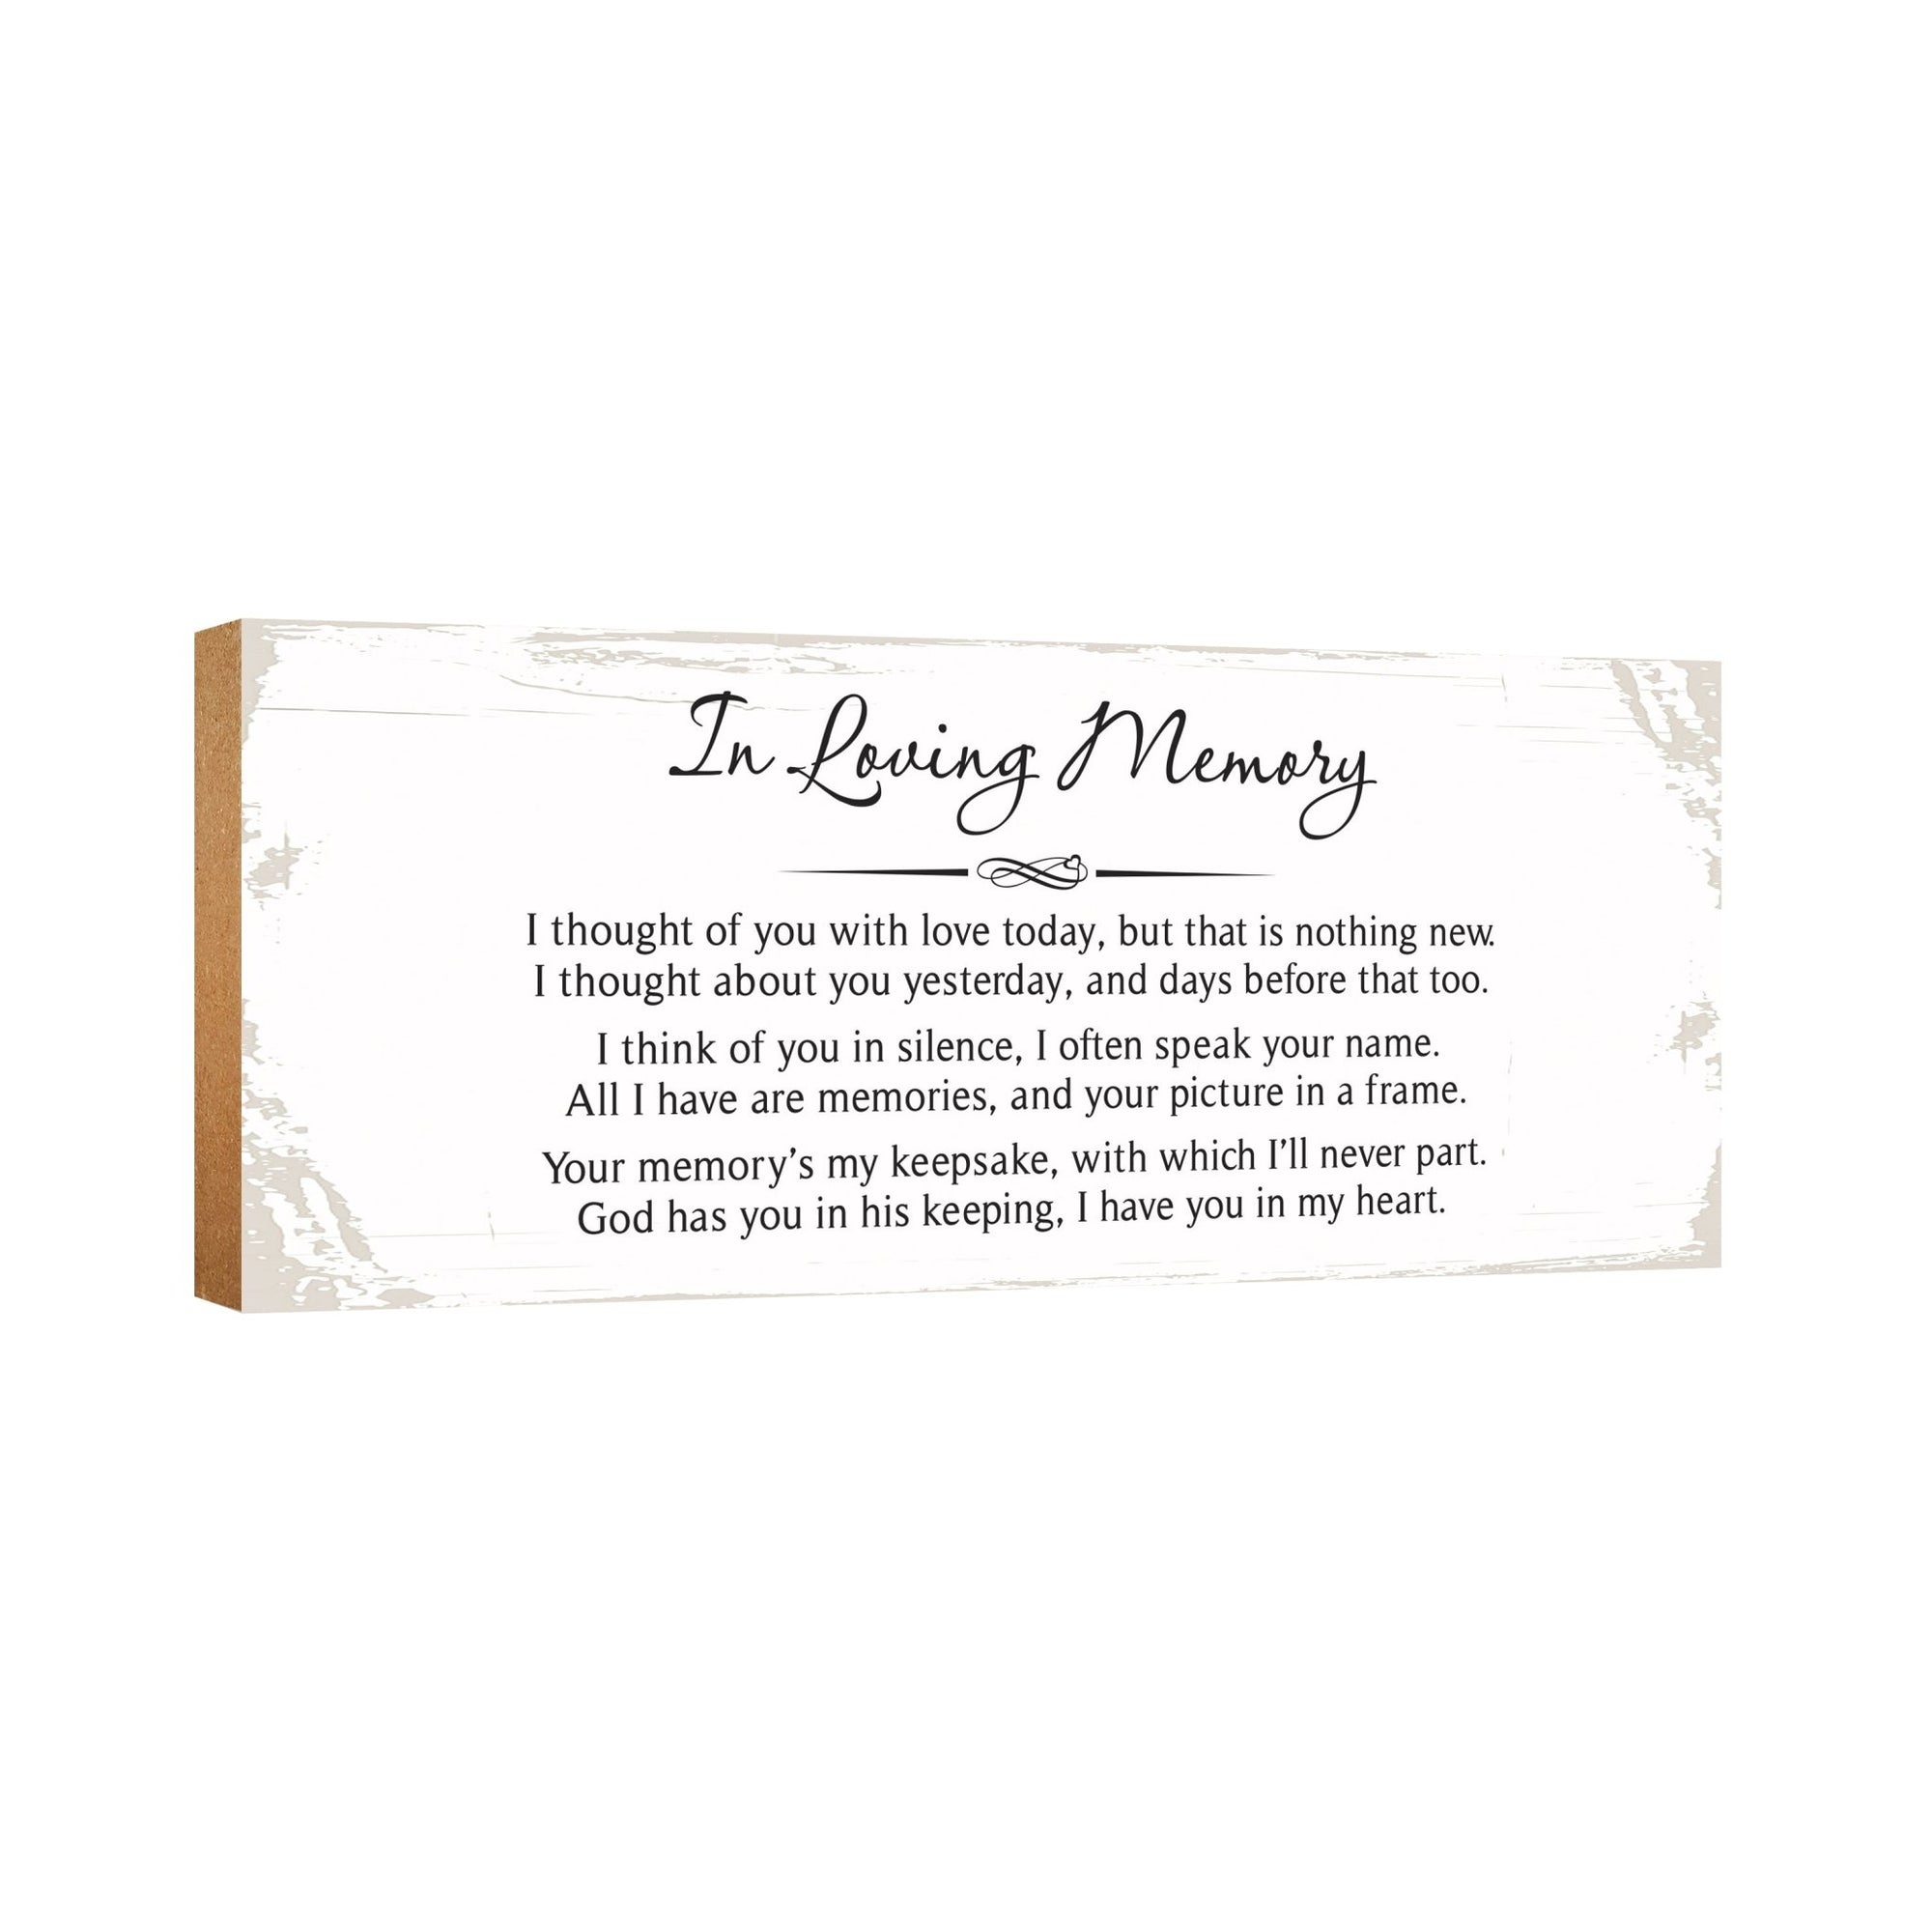 Modern Inspirational Pet Memorial 4x10 inches Wooden Sign (In Loving Memory) Tabletop Plaque Home Decoration Loss of Pet Bereavement Sympathy Keepsake - LifeSong Milestones